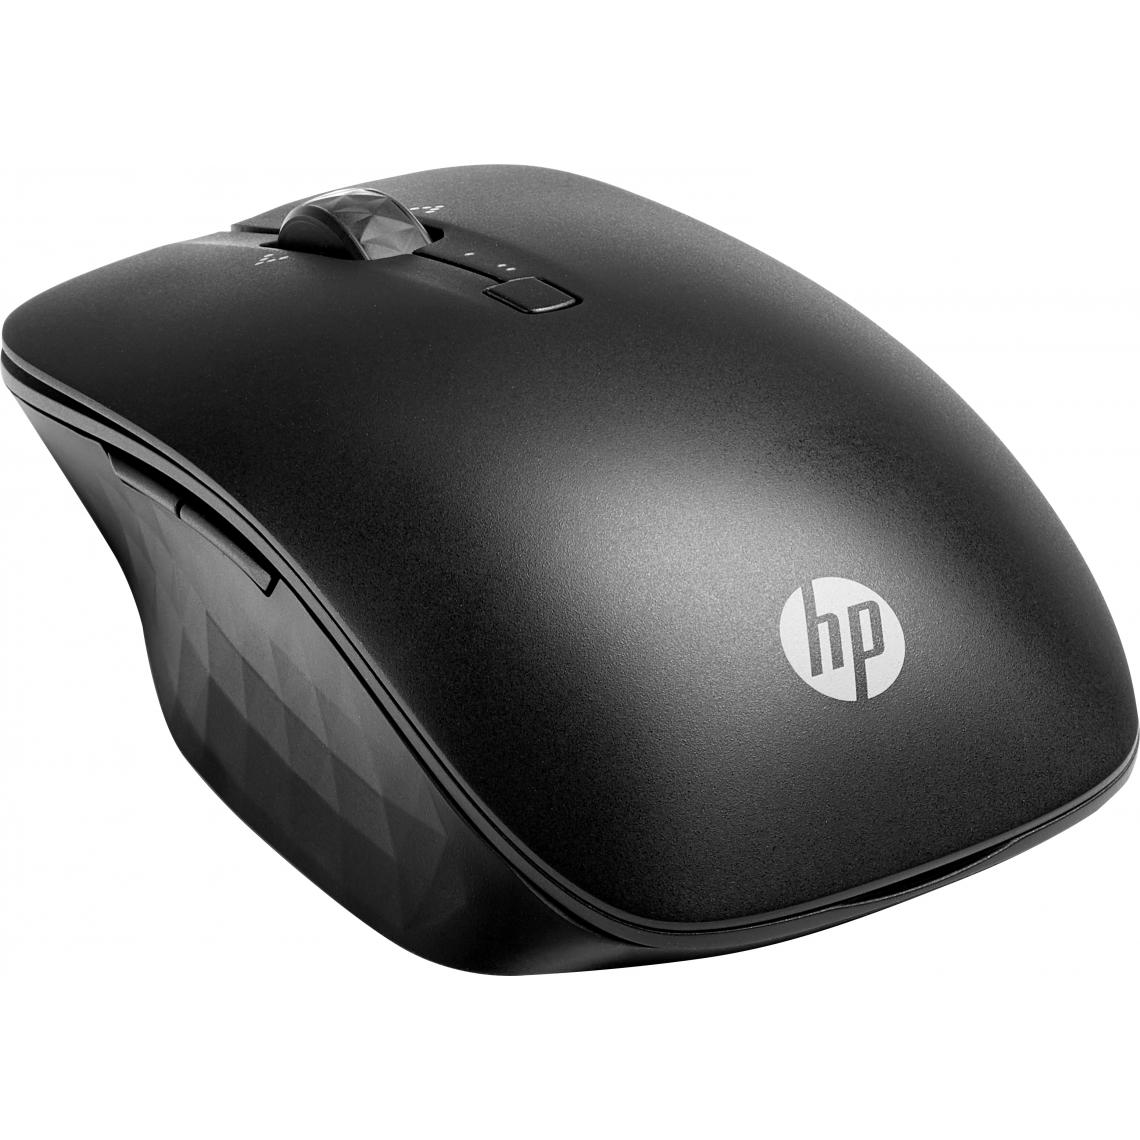 Hp - HP 6SP30AA souris Droitier Bluetooth Track-on-glass (TOG) 1200 DPI - Souris